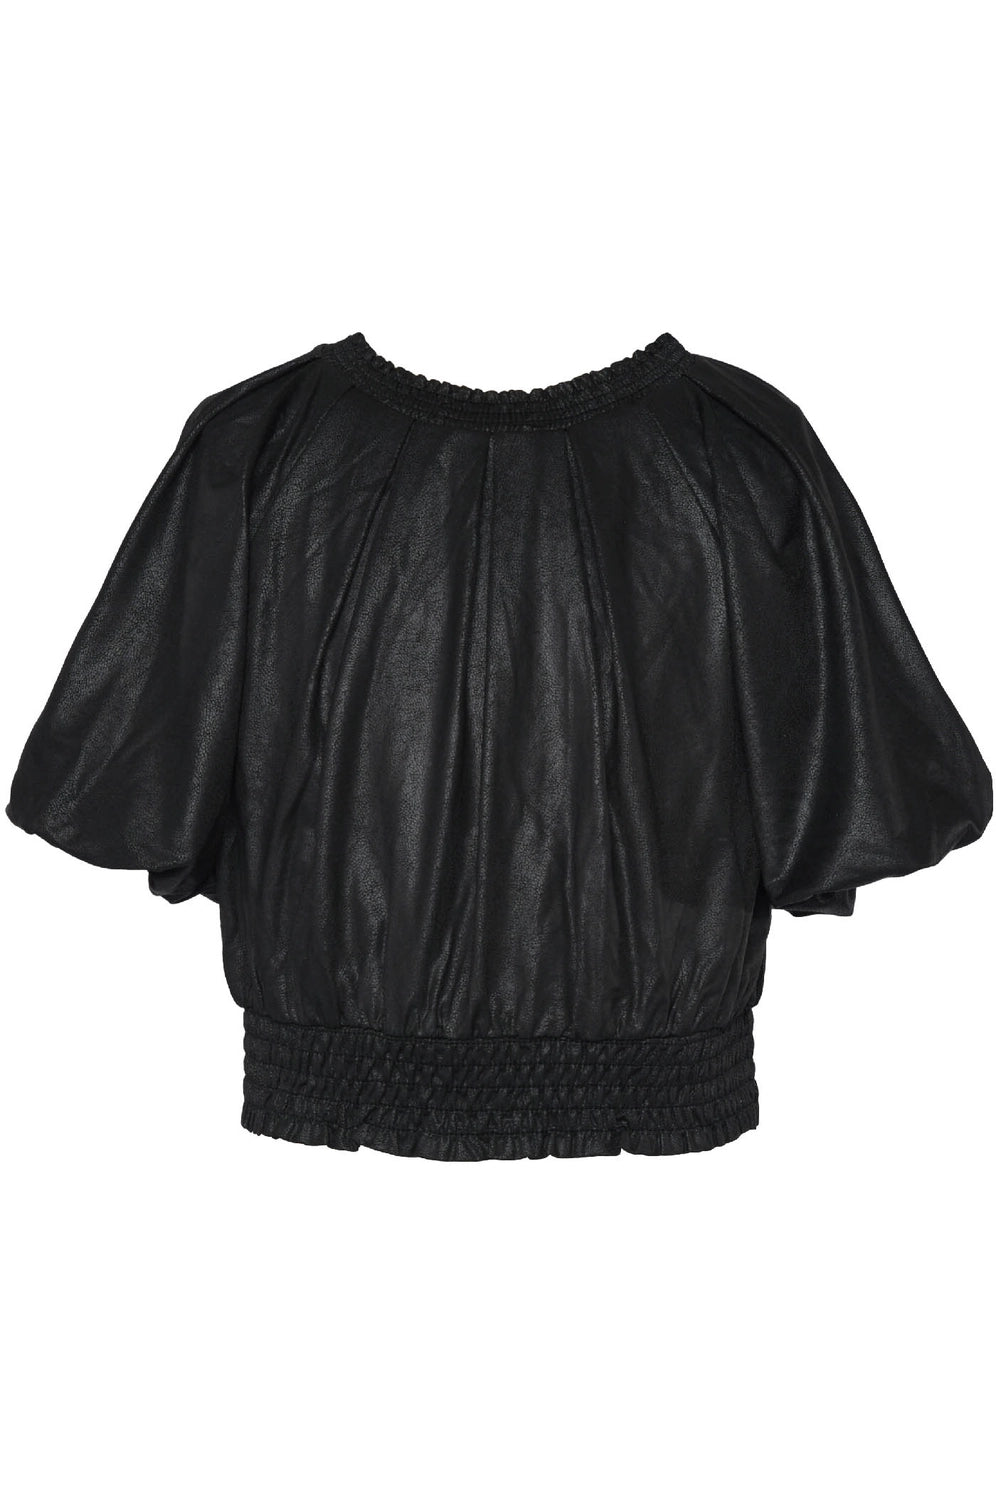 Little's bubble sleeve leather top